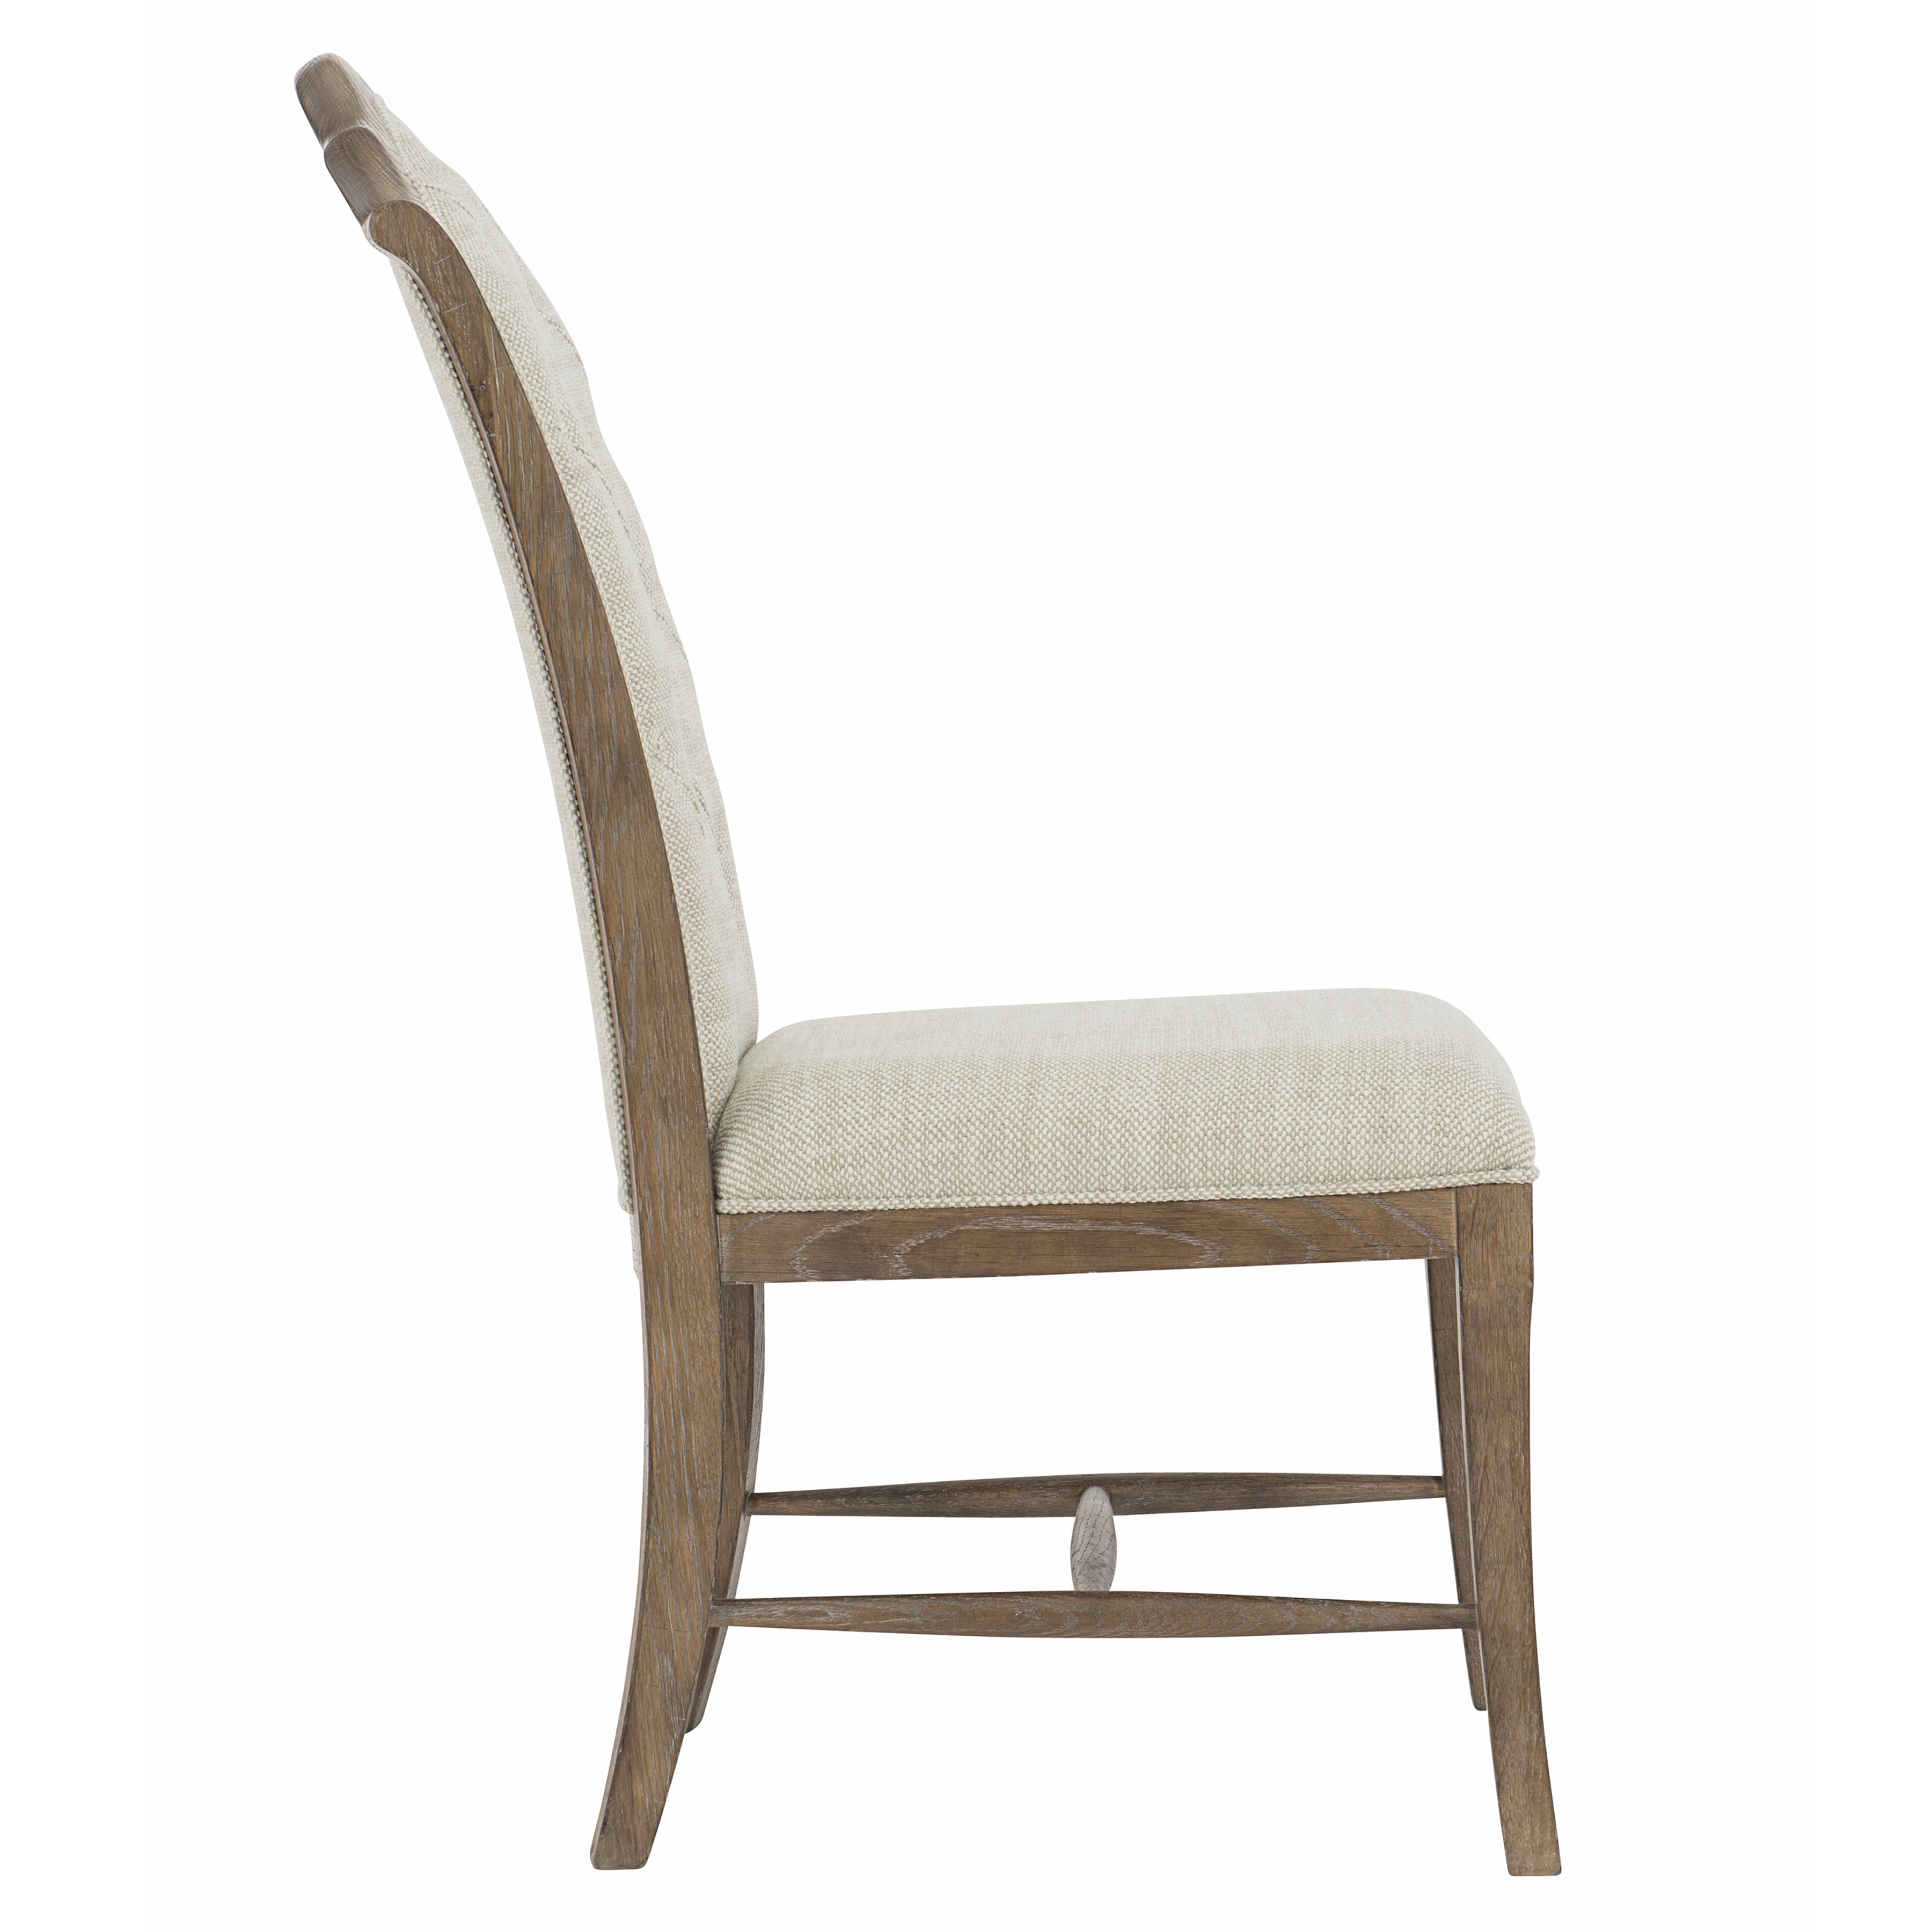 Rustic Patina Side Chair in Peppercorn Finish